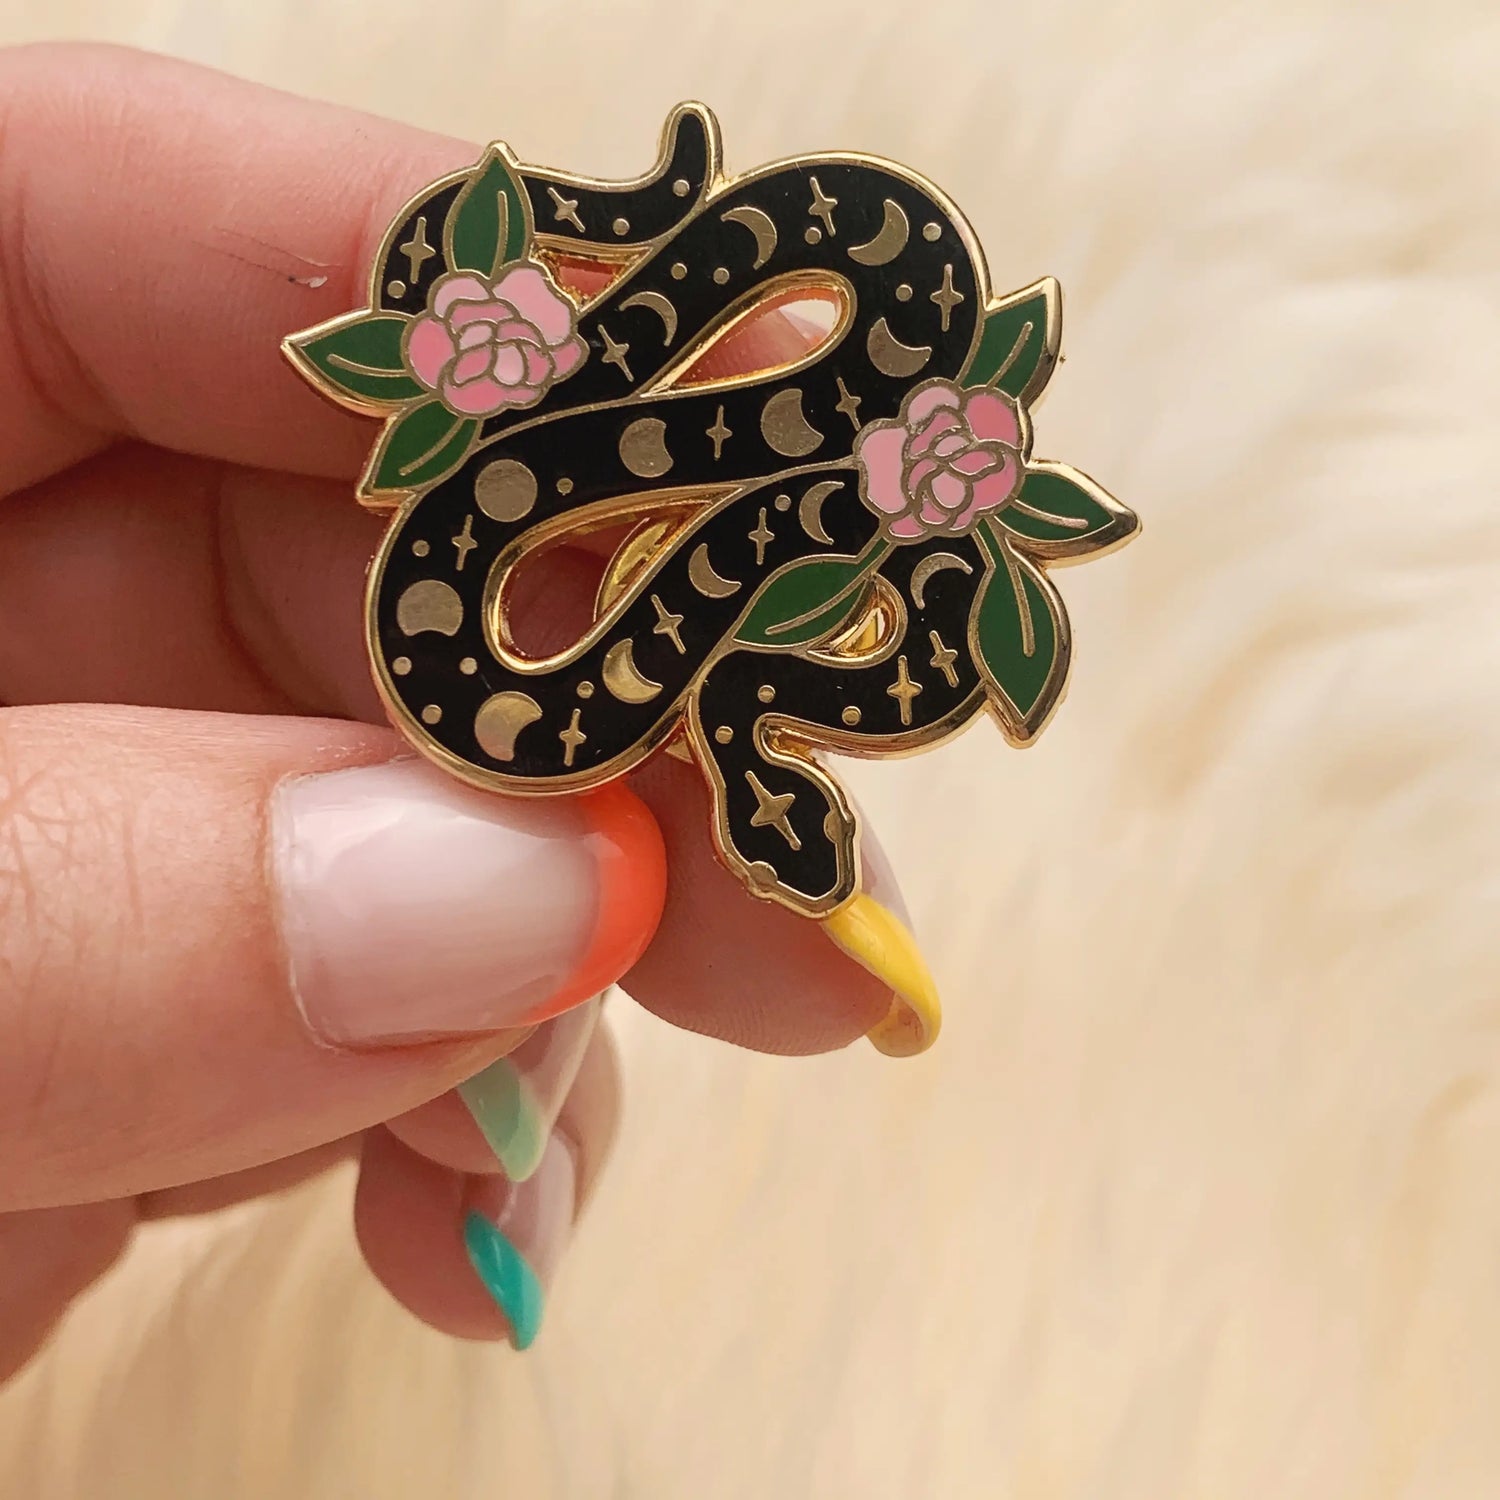 Serpent and Flowers Enamel Pin - Moon Room Shop and Wellness